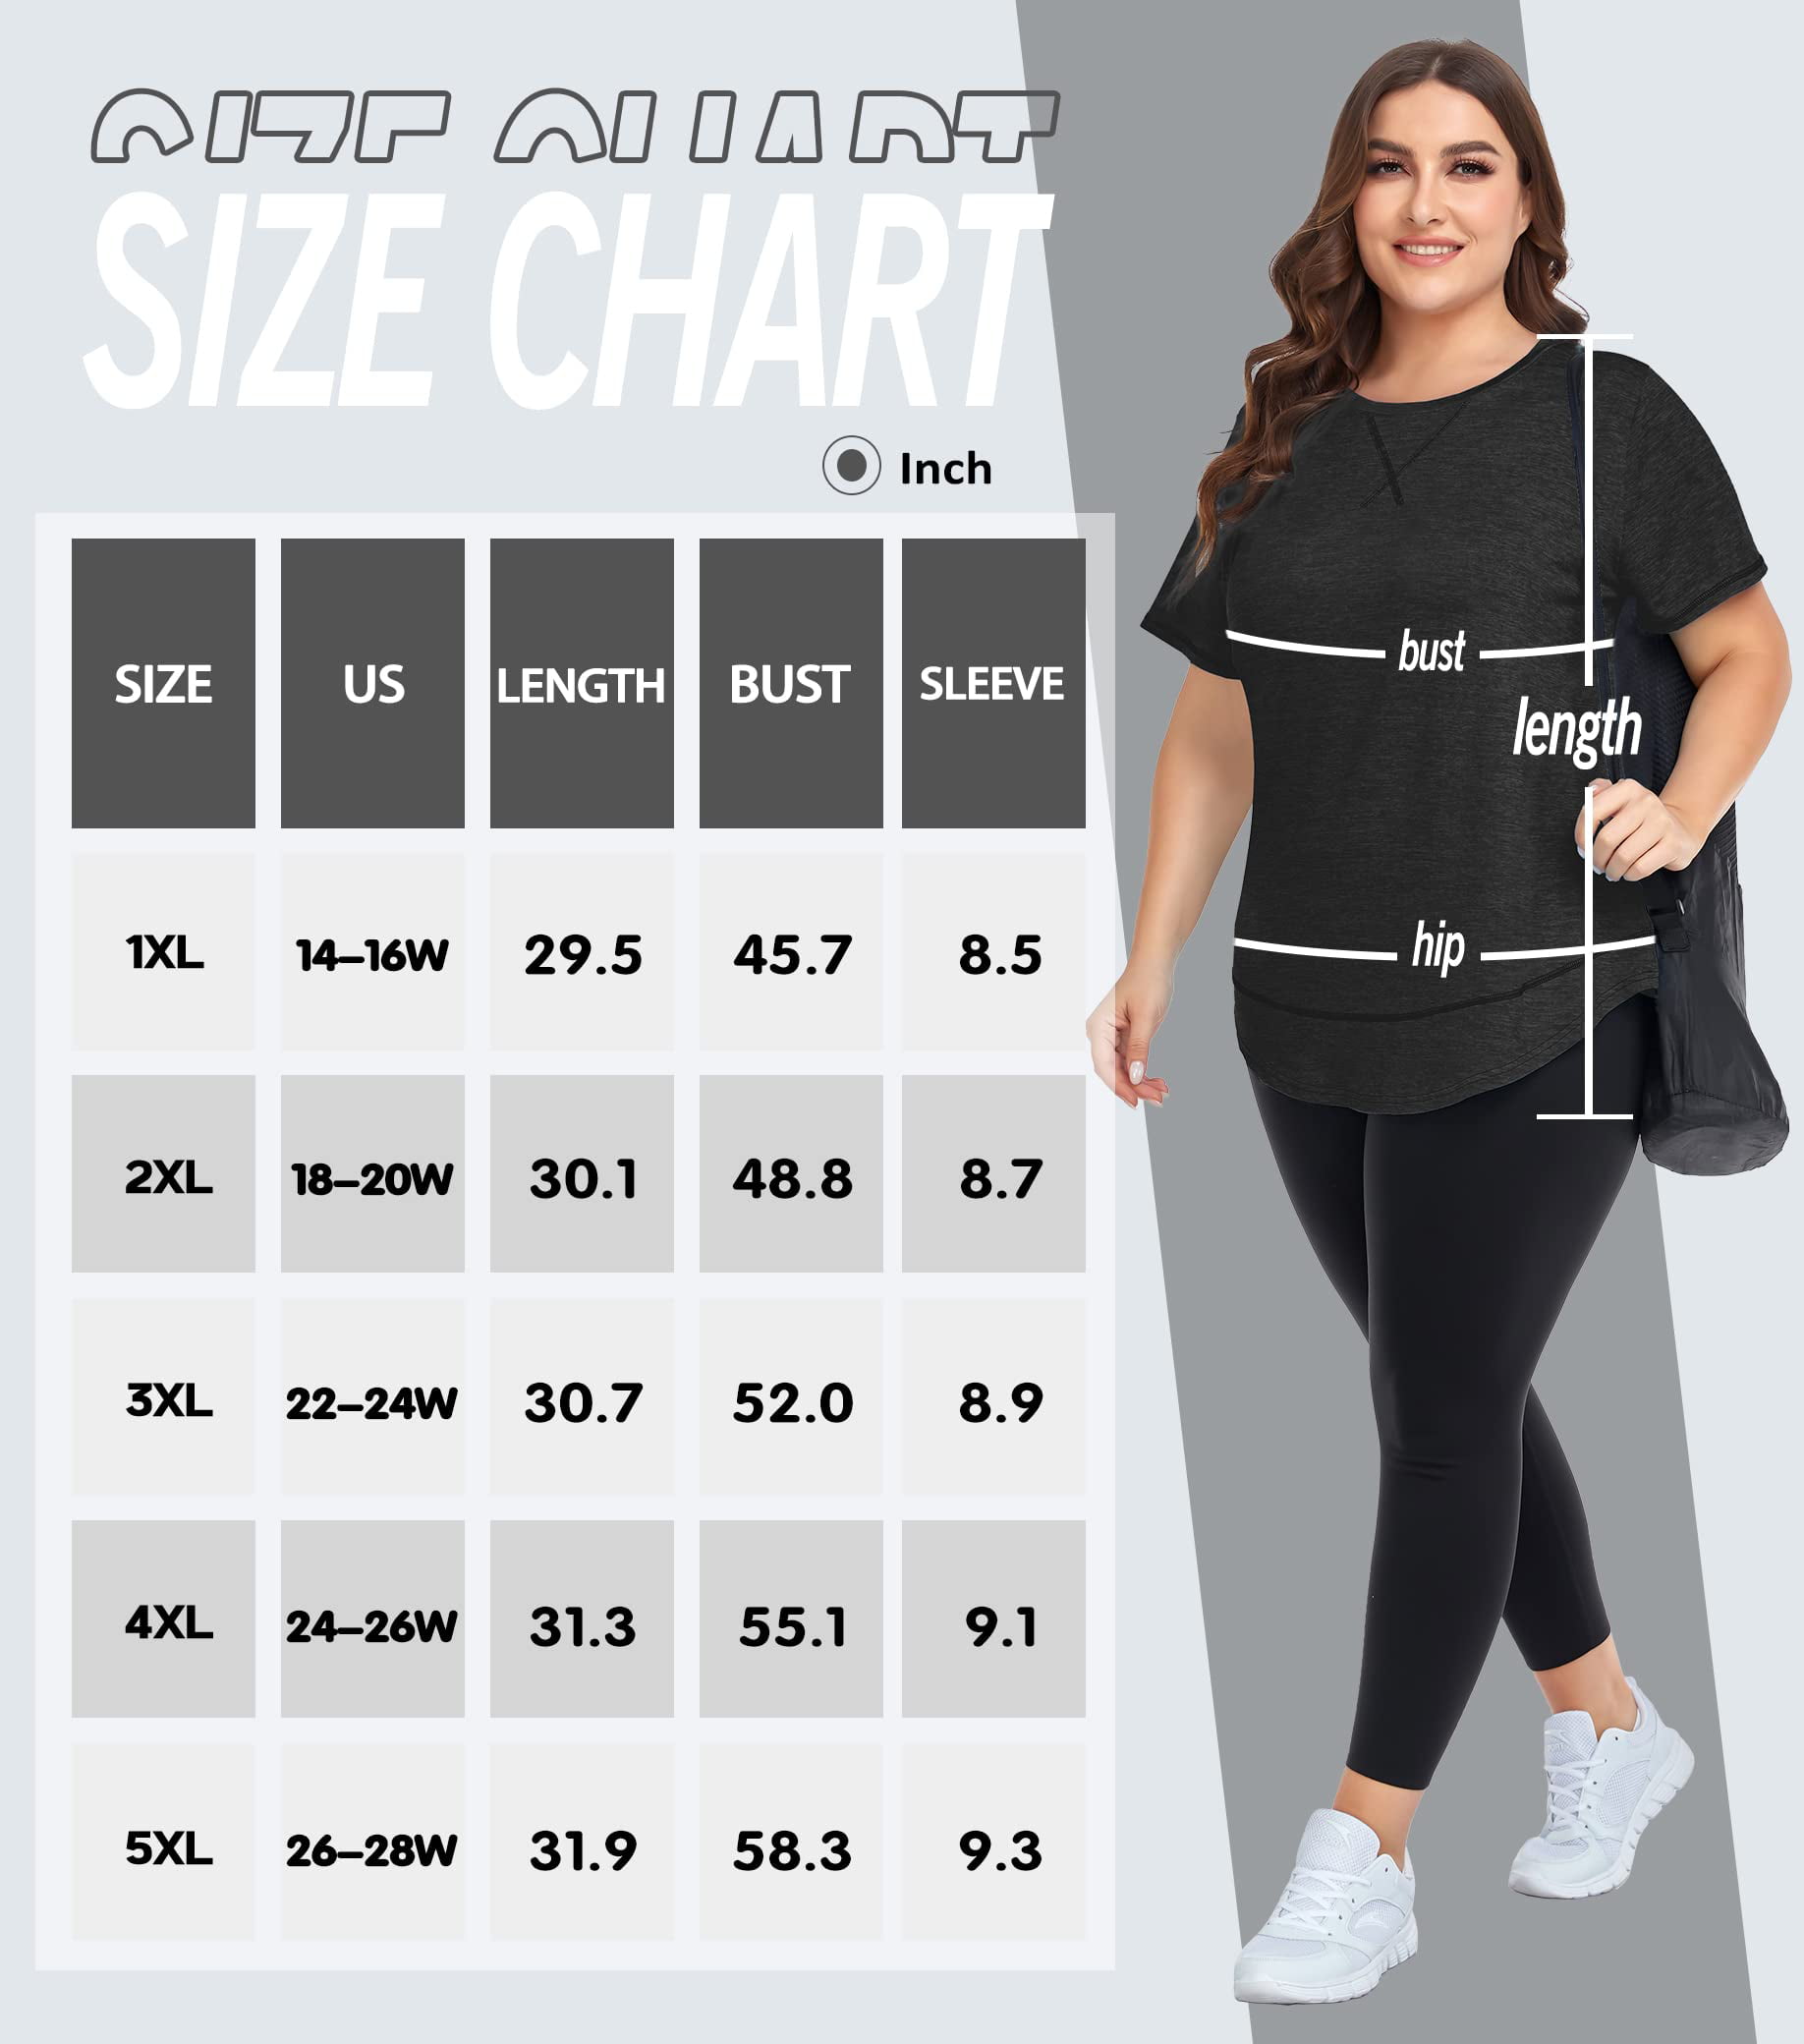 SIX WOMEN SIZES 2XL TO 4XL SHARE HOW THE ACTIVEWEAR INDUSTRY IS